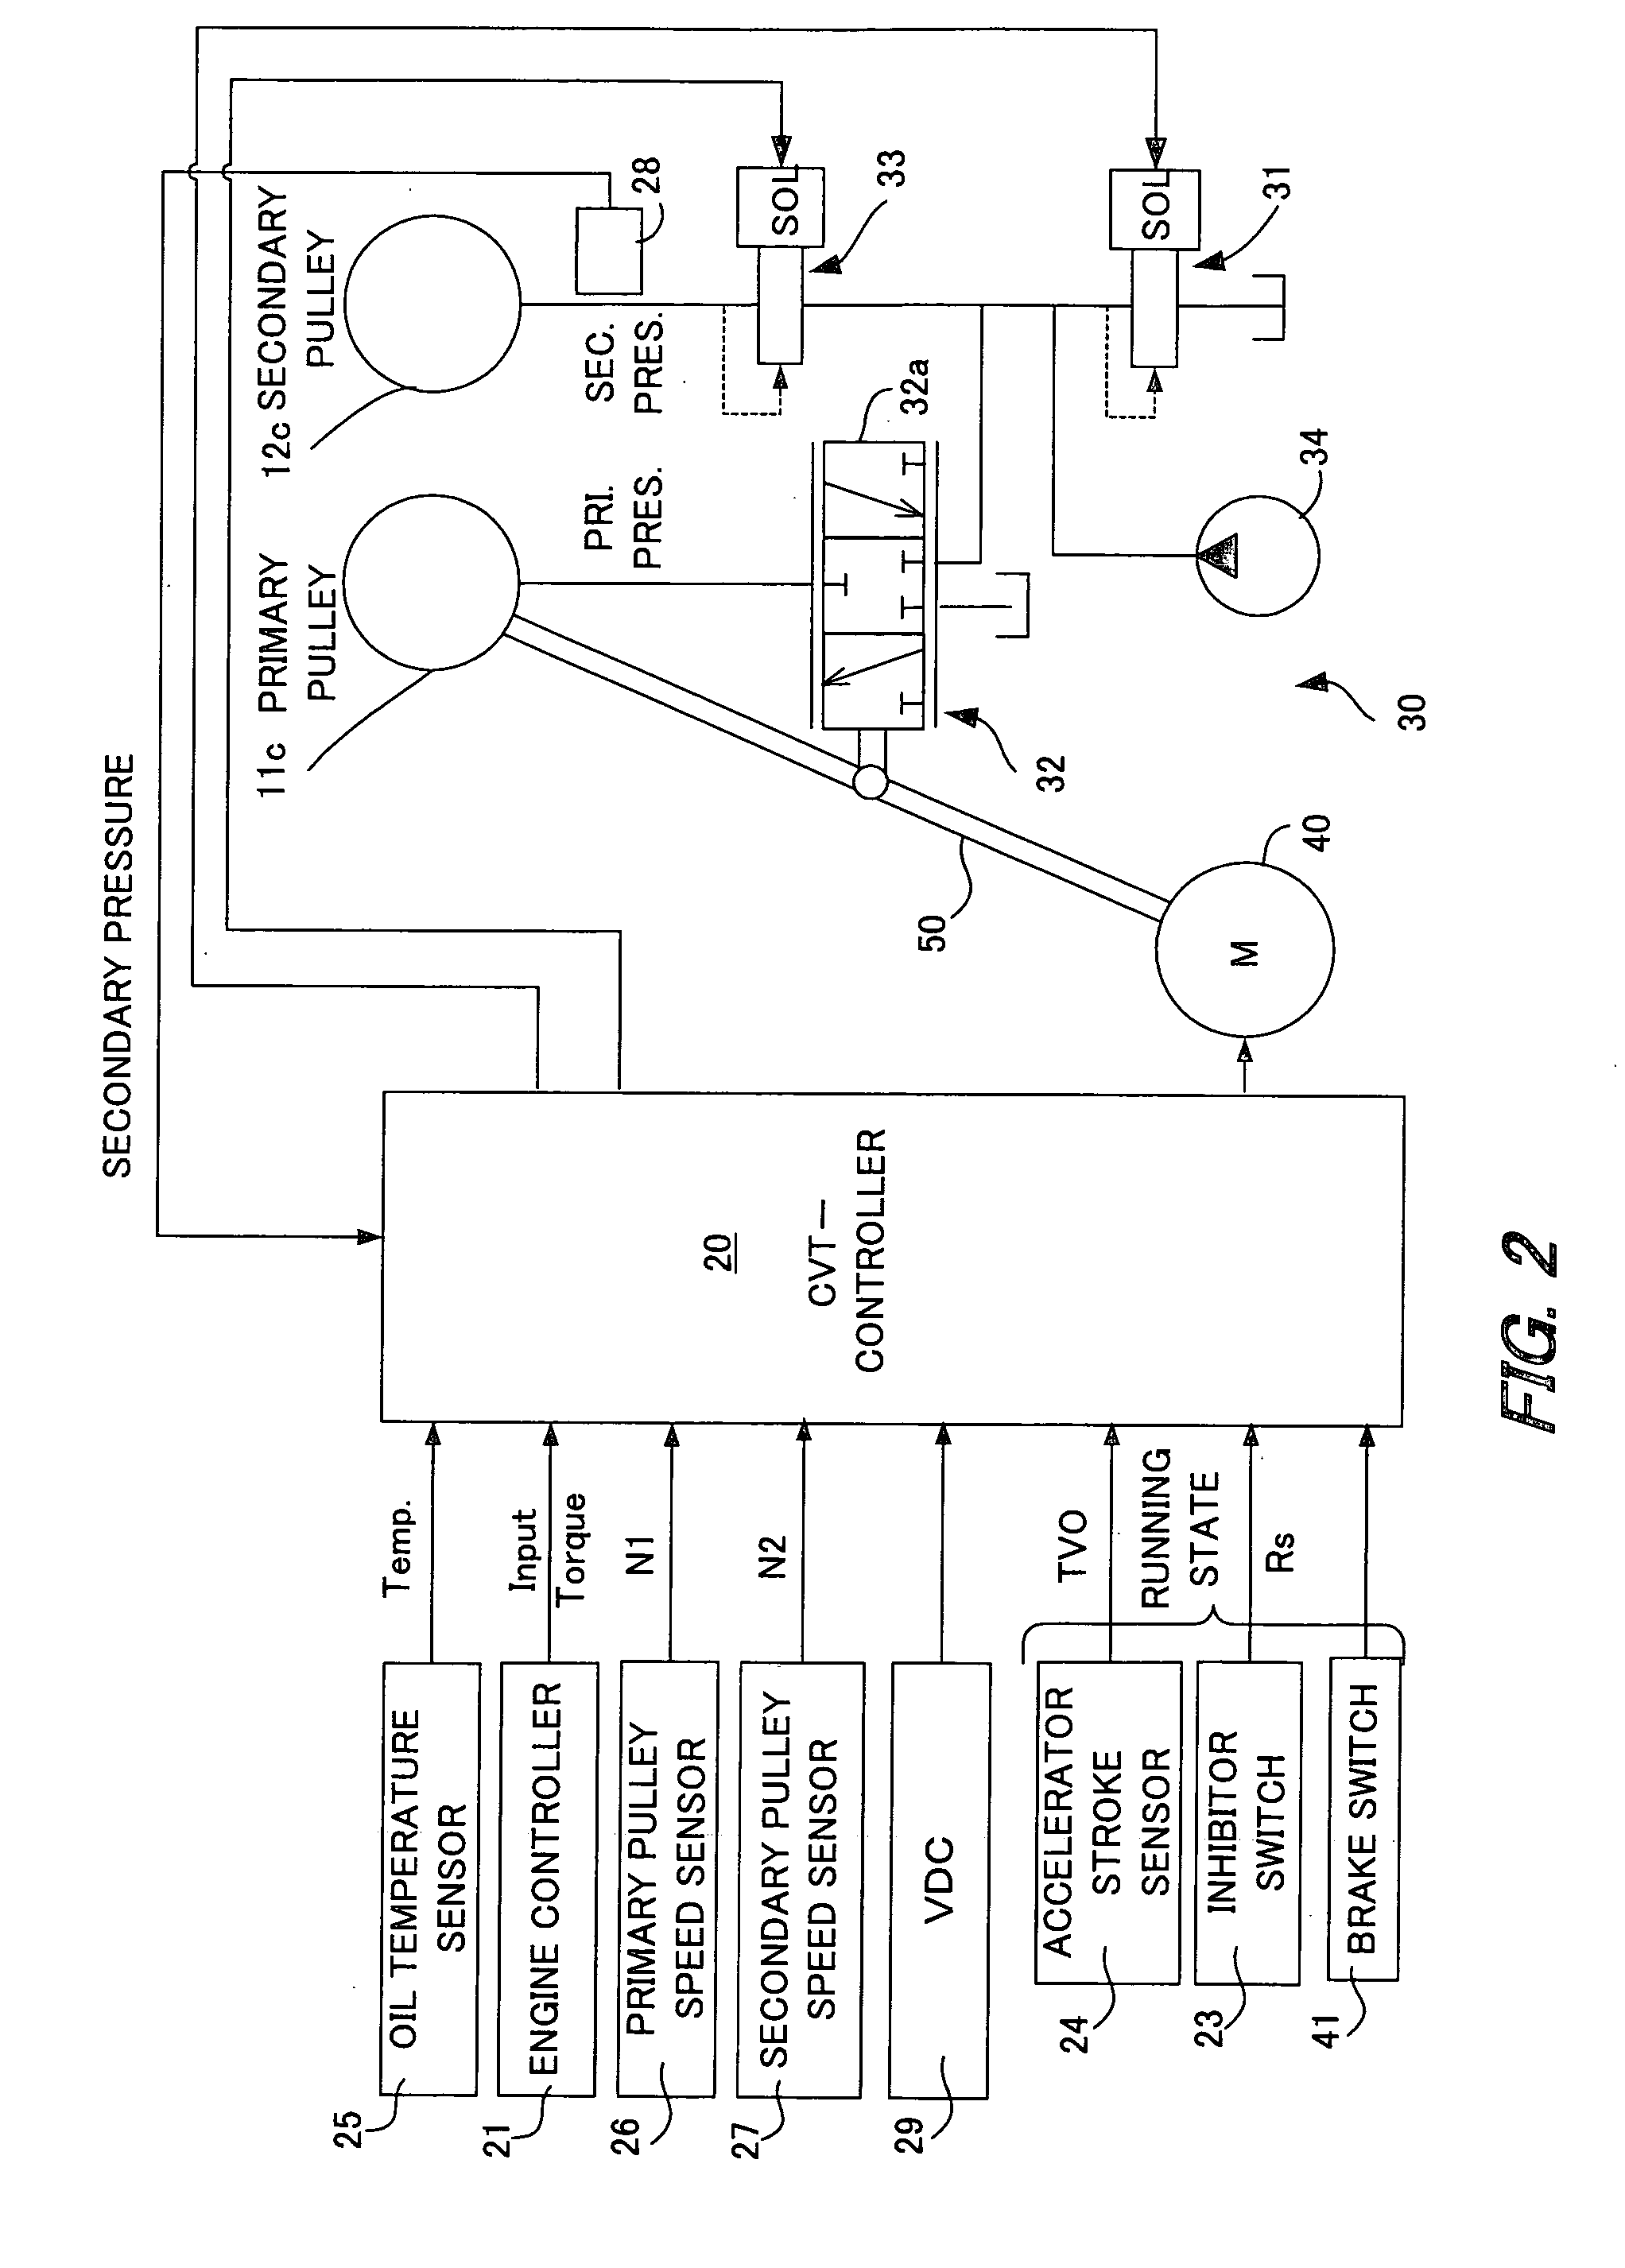 Abnormal oil pressure reduction determination device for vehicle transmission